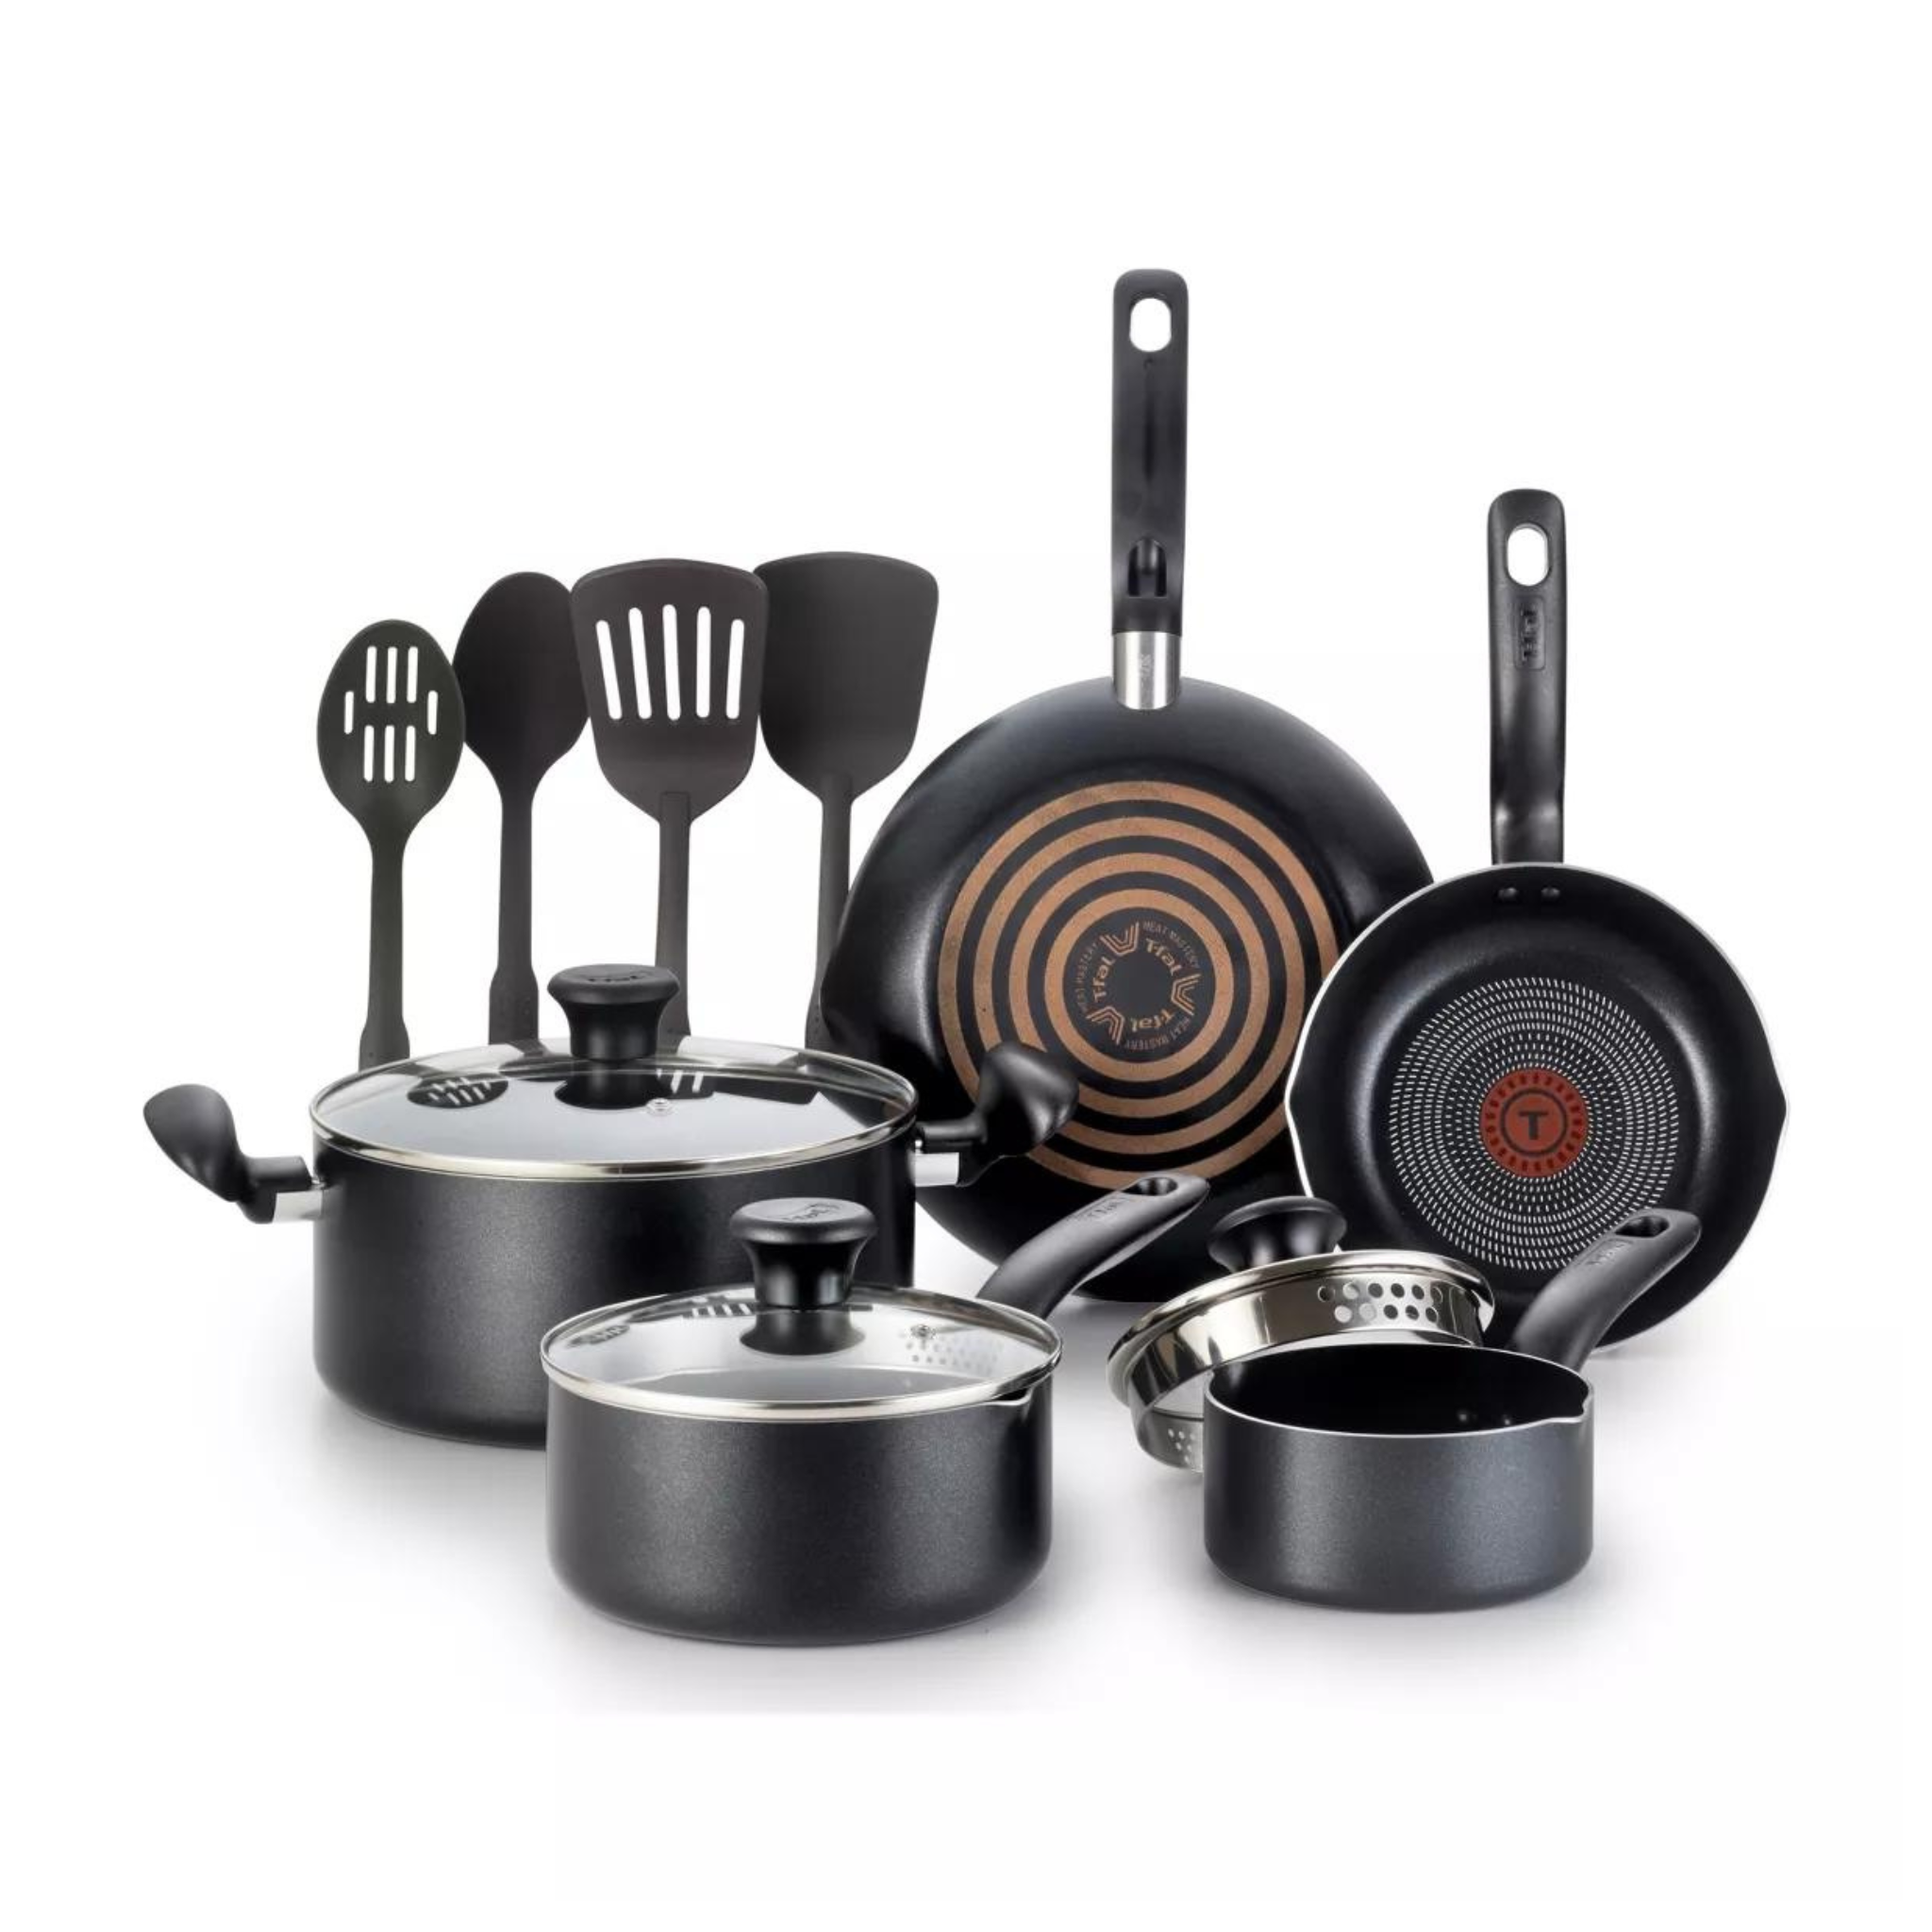 T-fal 12pc Simply Cook Nonstick Cookware Set